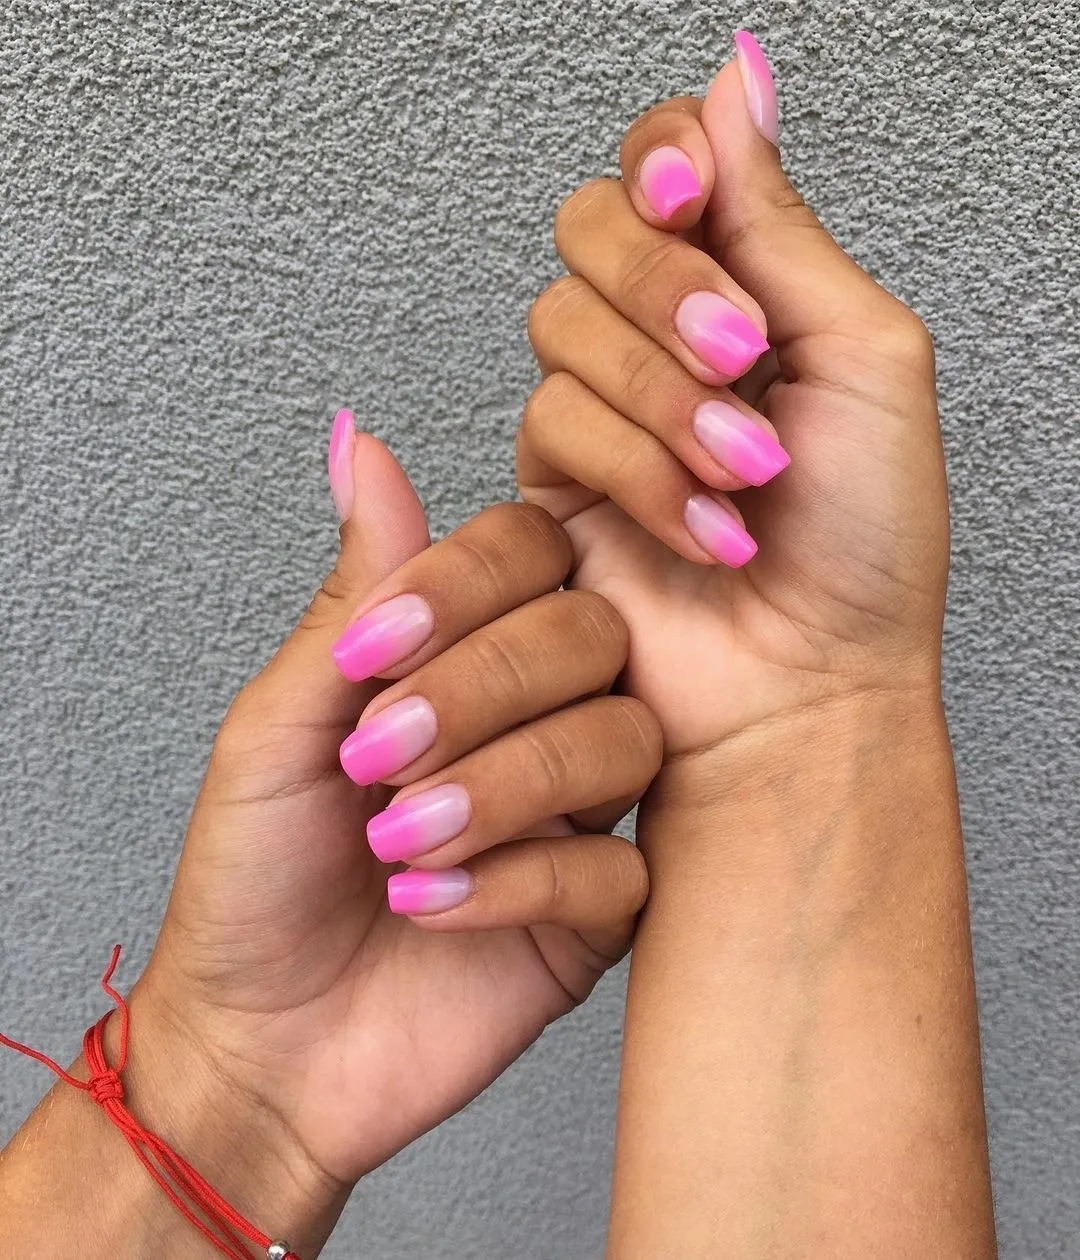 Nail extensions with ombre design 💅. It's a long weekend and time for  PAMpering is necessary to unwind and get you nail and beauty ca... |  Instagram